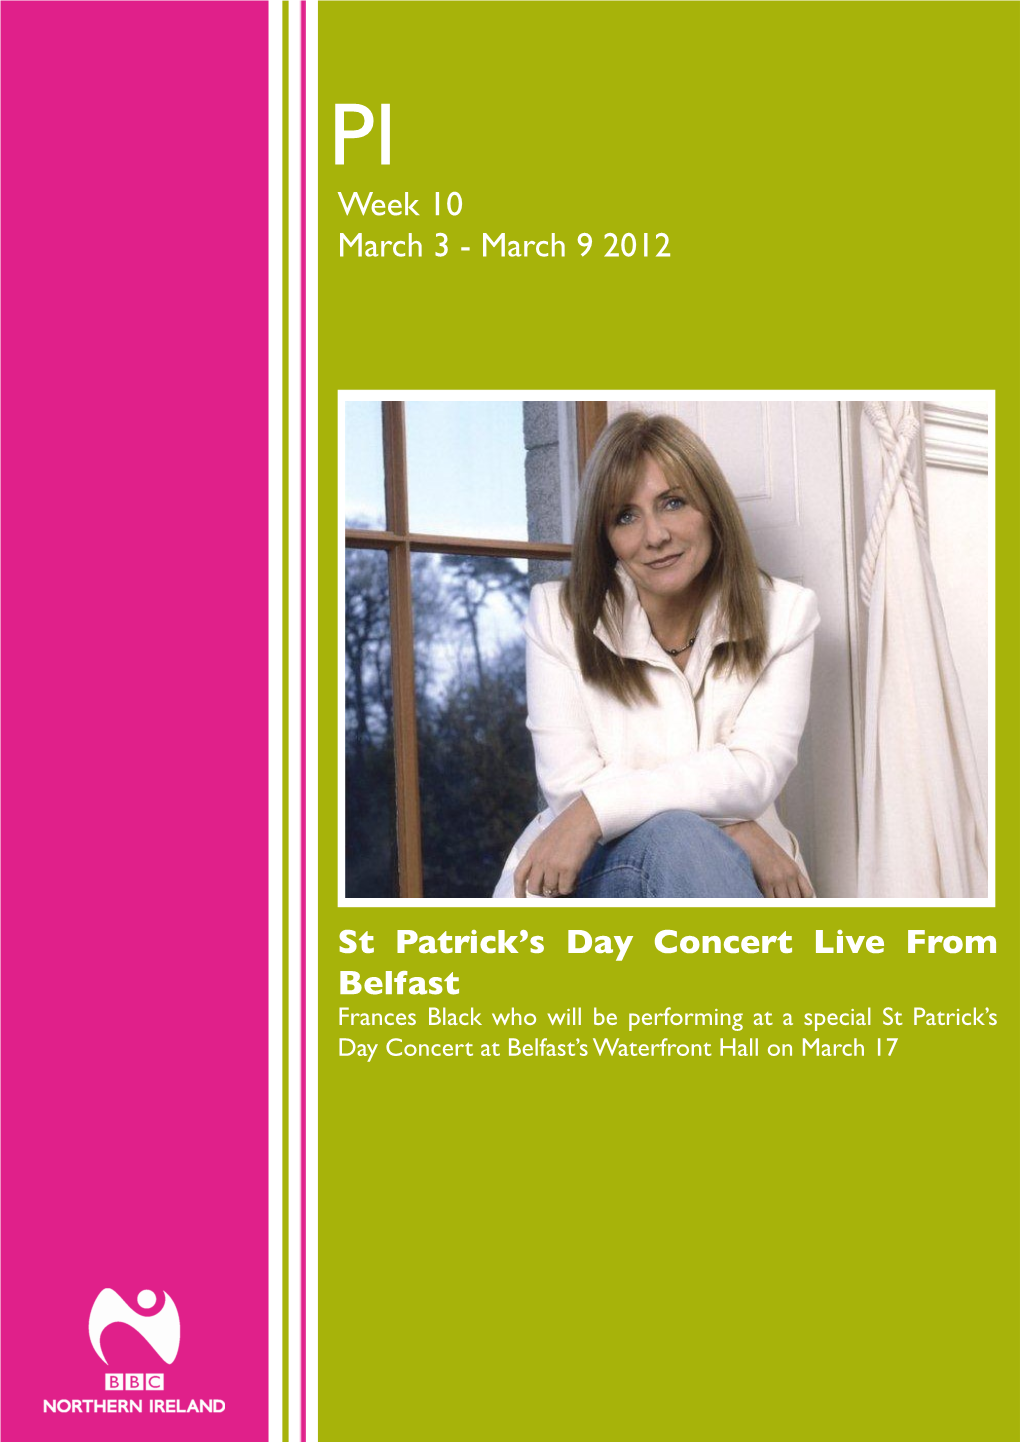 March 9 2012 St Patrick's Day Concert Live from Belfast